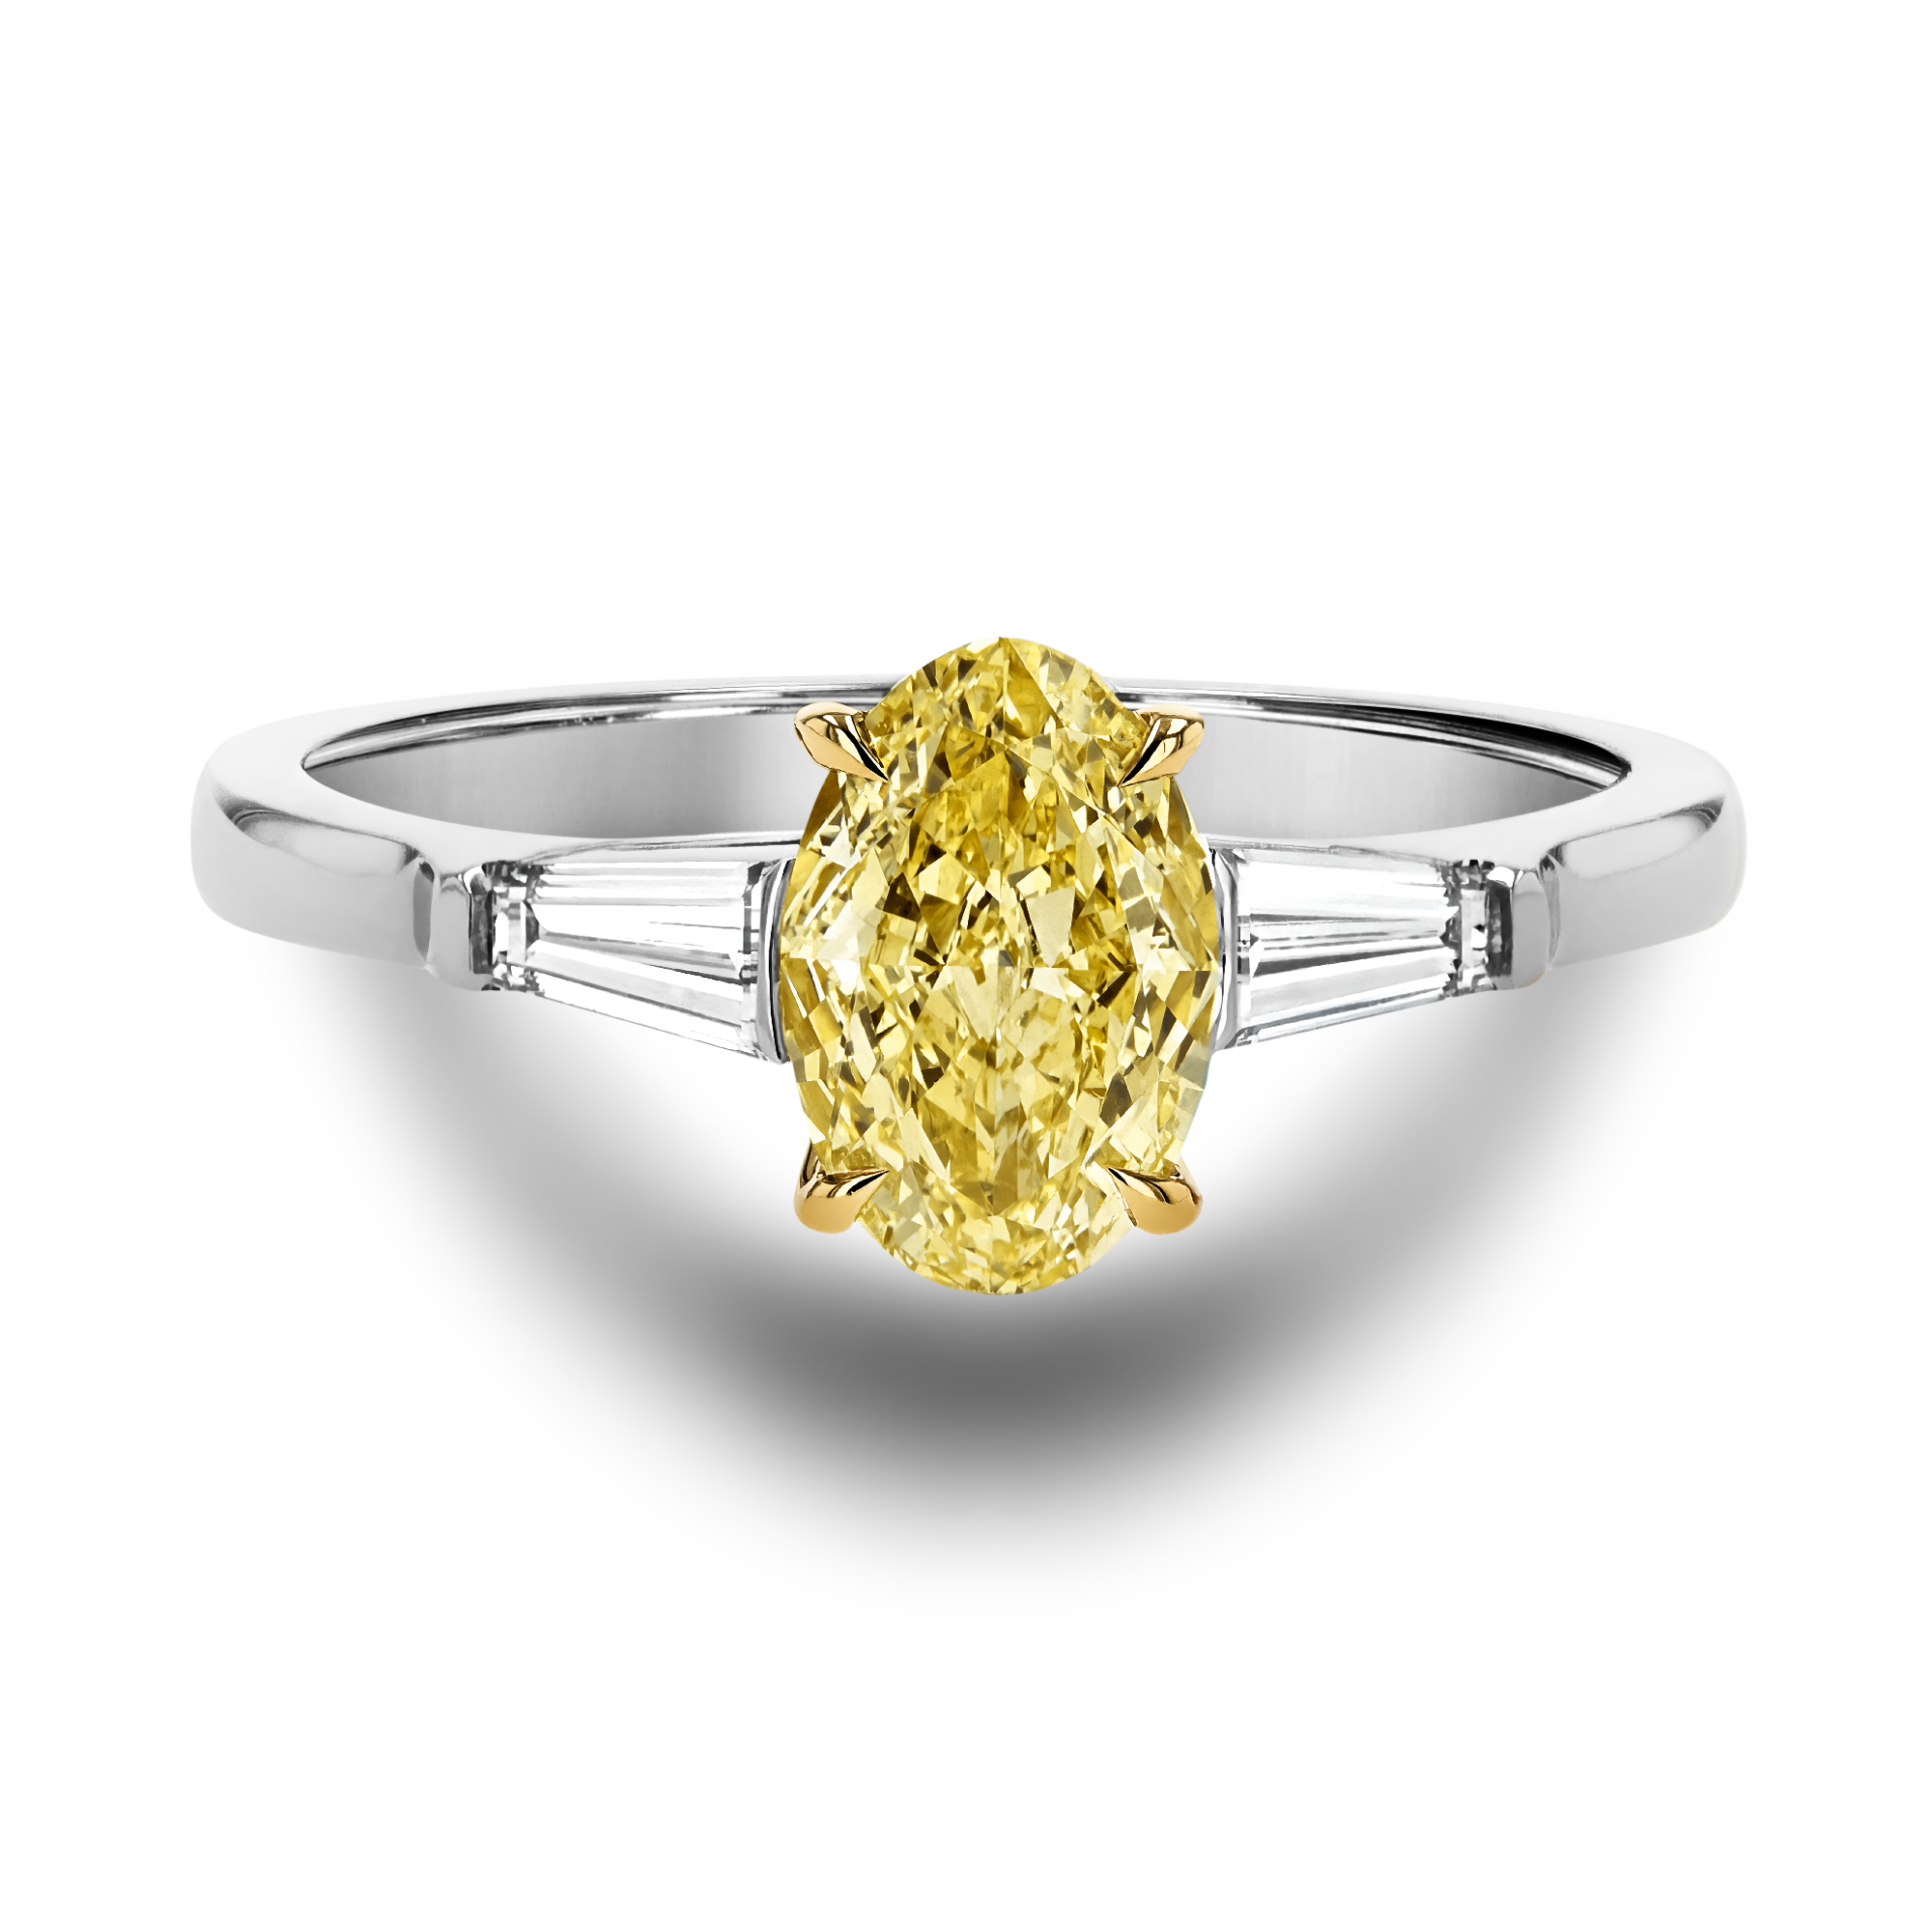 Regency 1.01ct Fancy Yellow Diamond Solitaire Ring Oval Cut, Claw Set_2